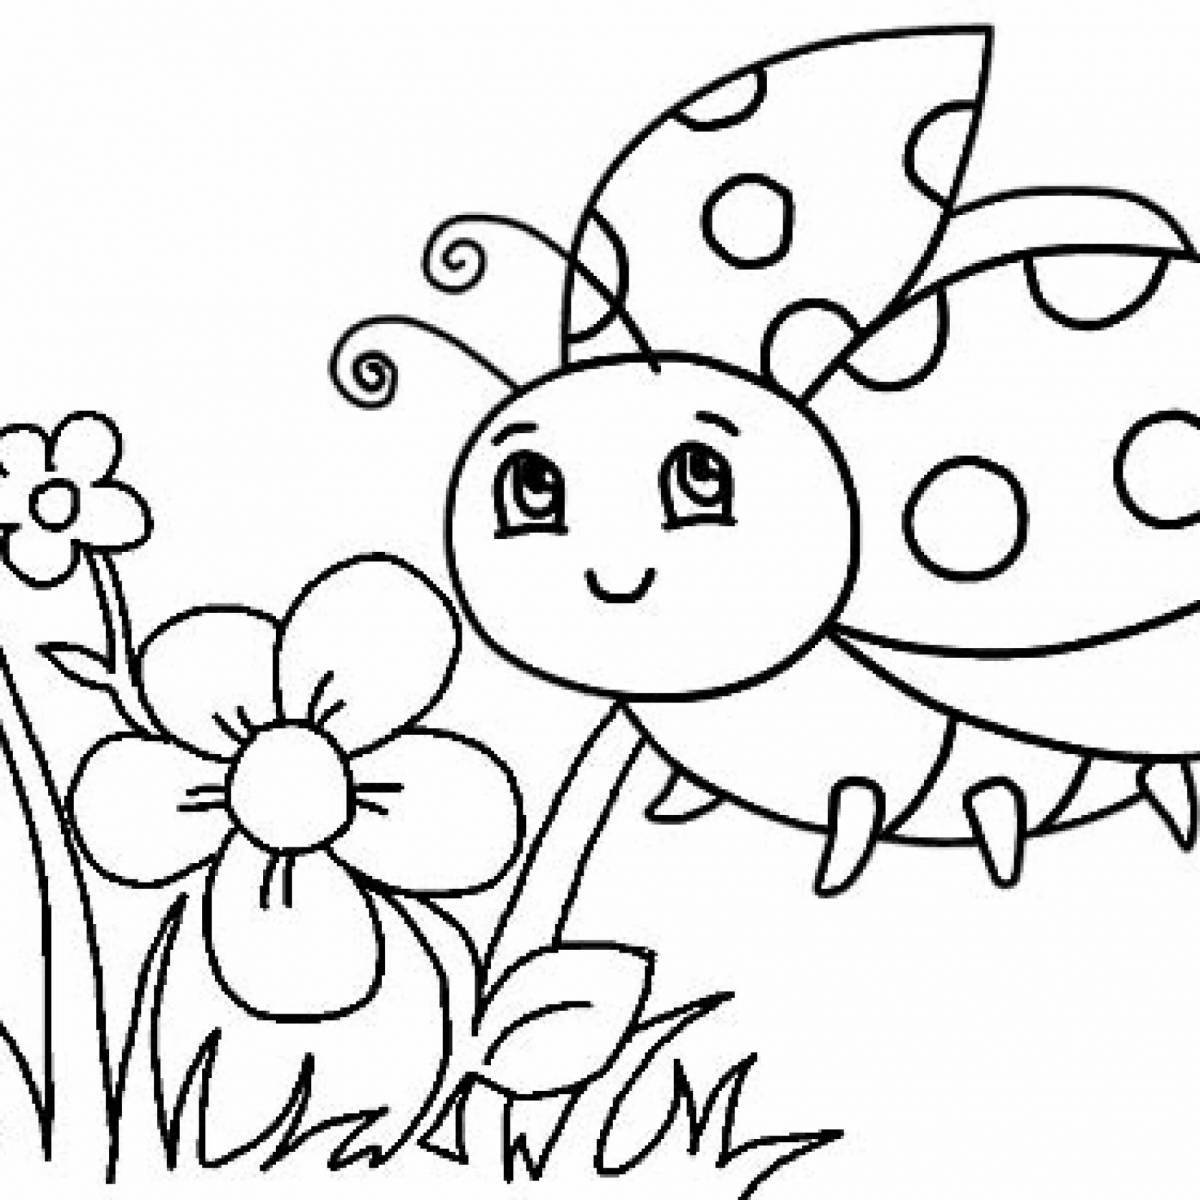 Colorful ladybug coloring page for 5-6 year olds